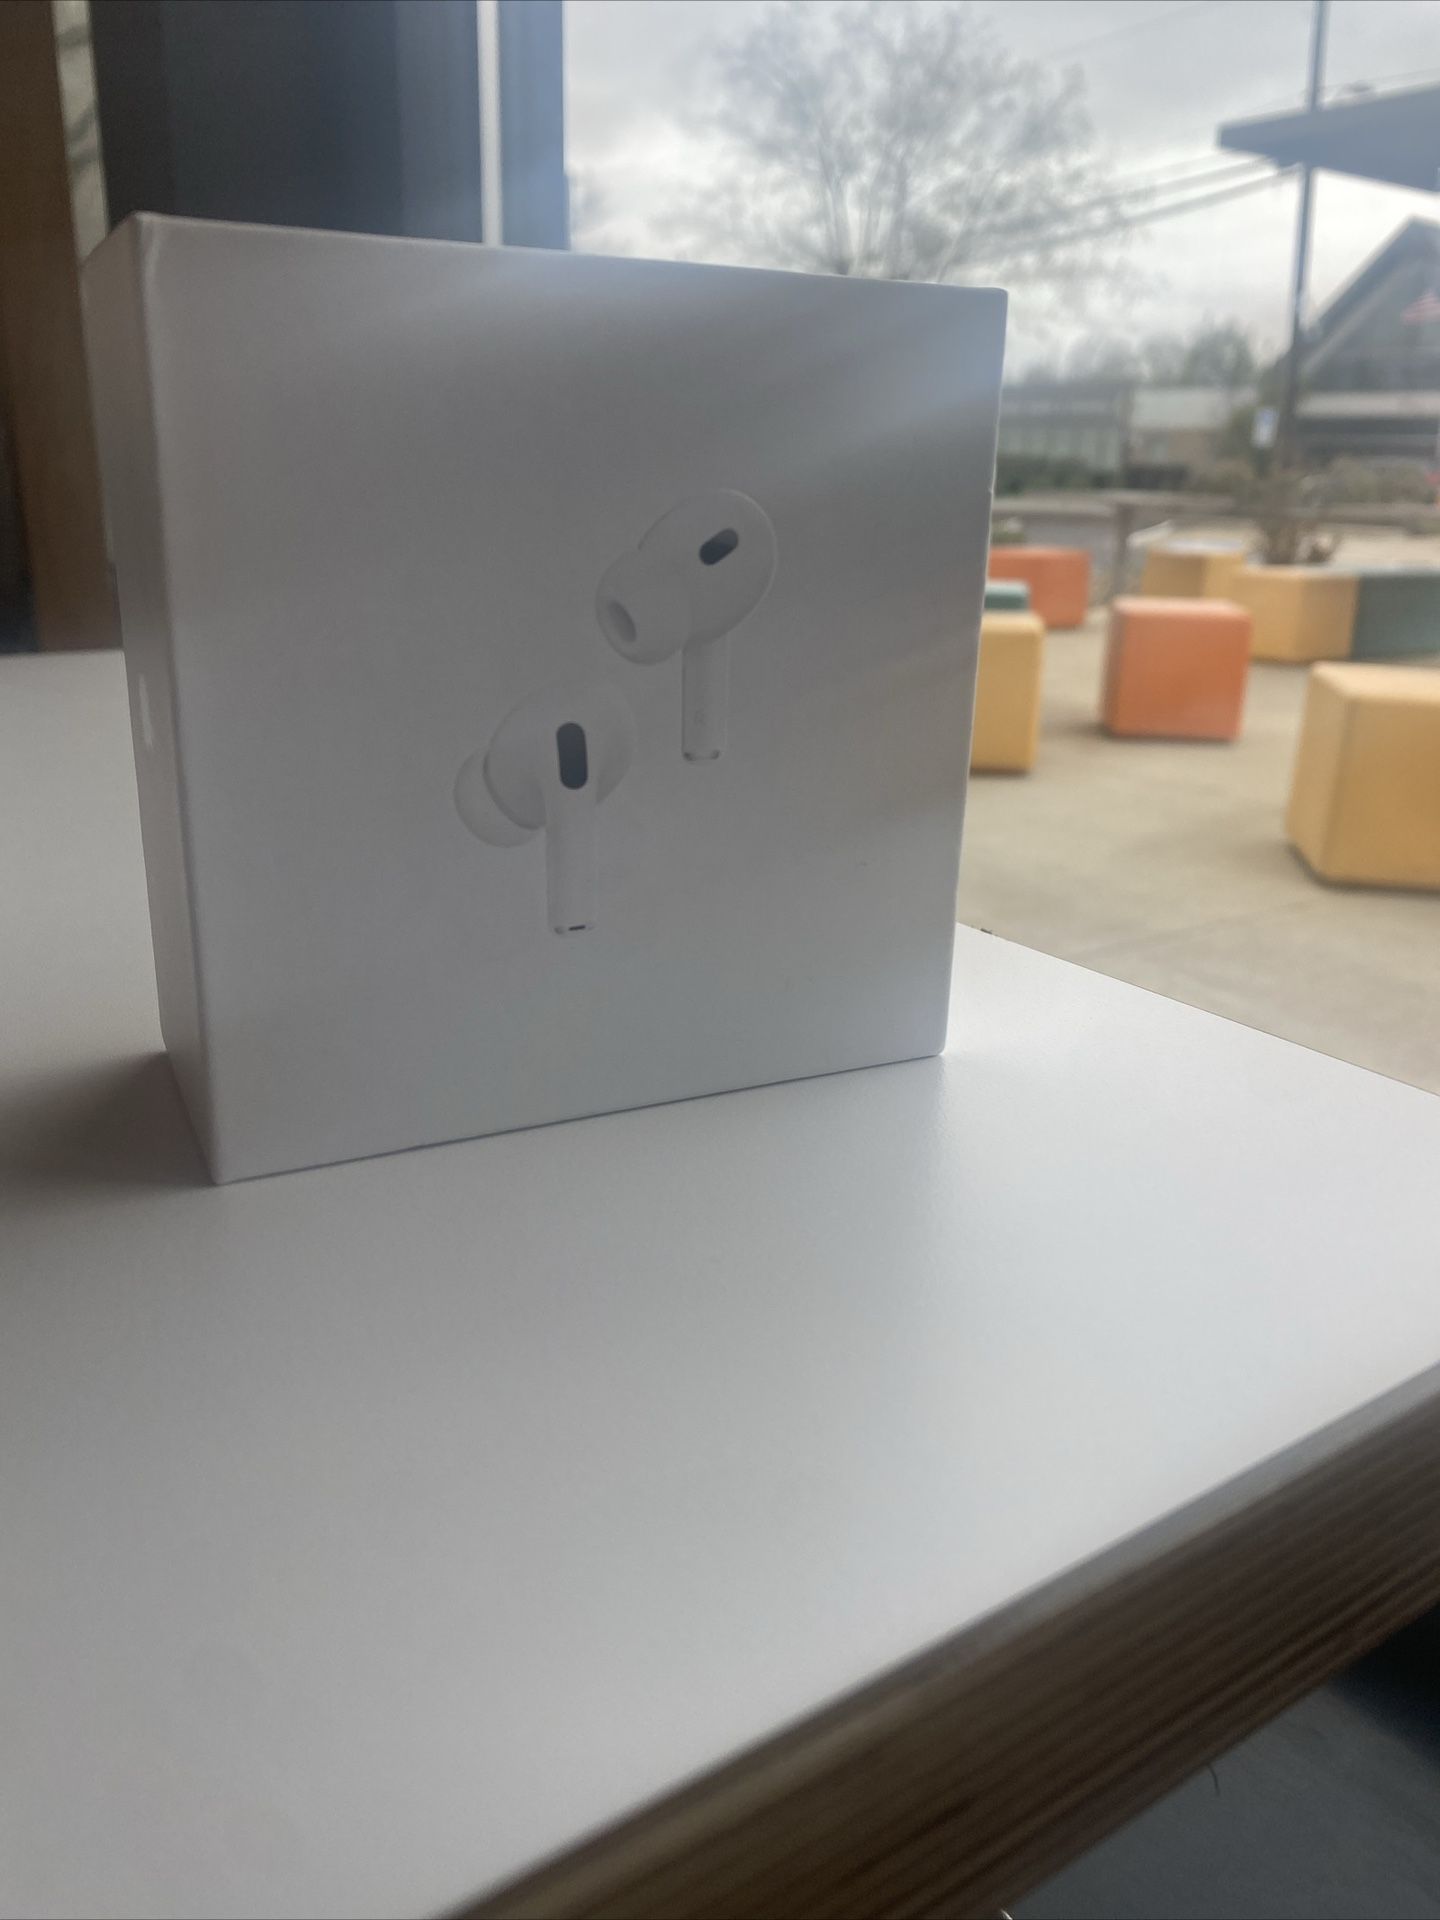 2nd Gen AirPods Pro (Authentic)